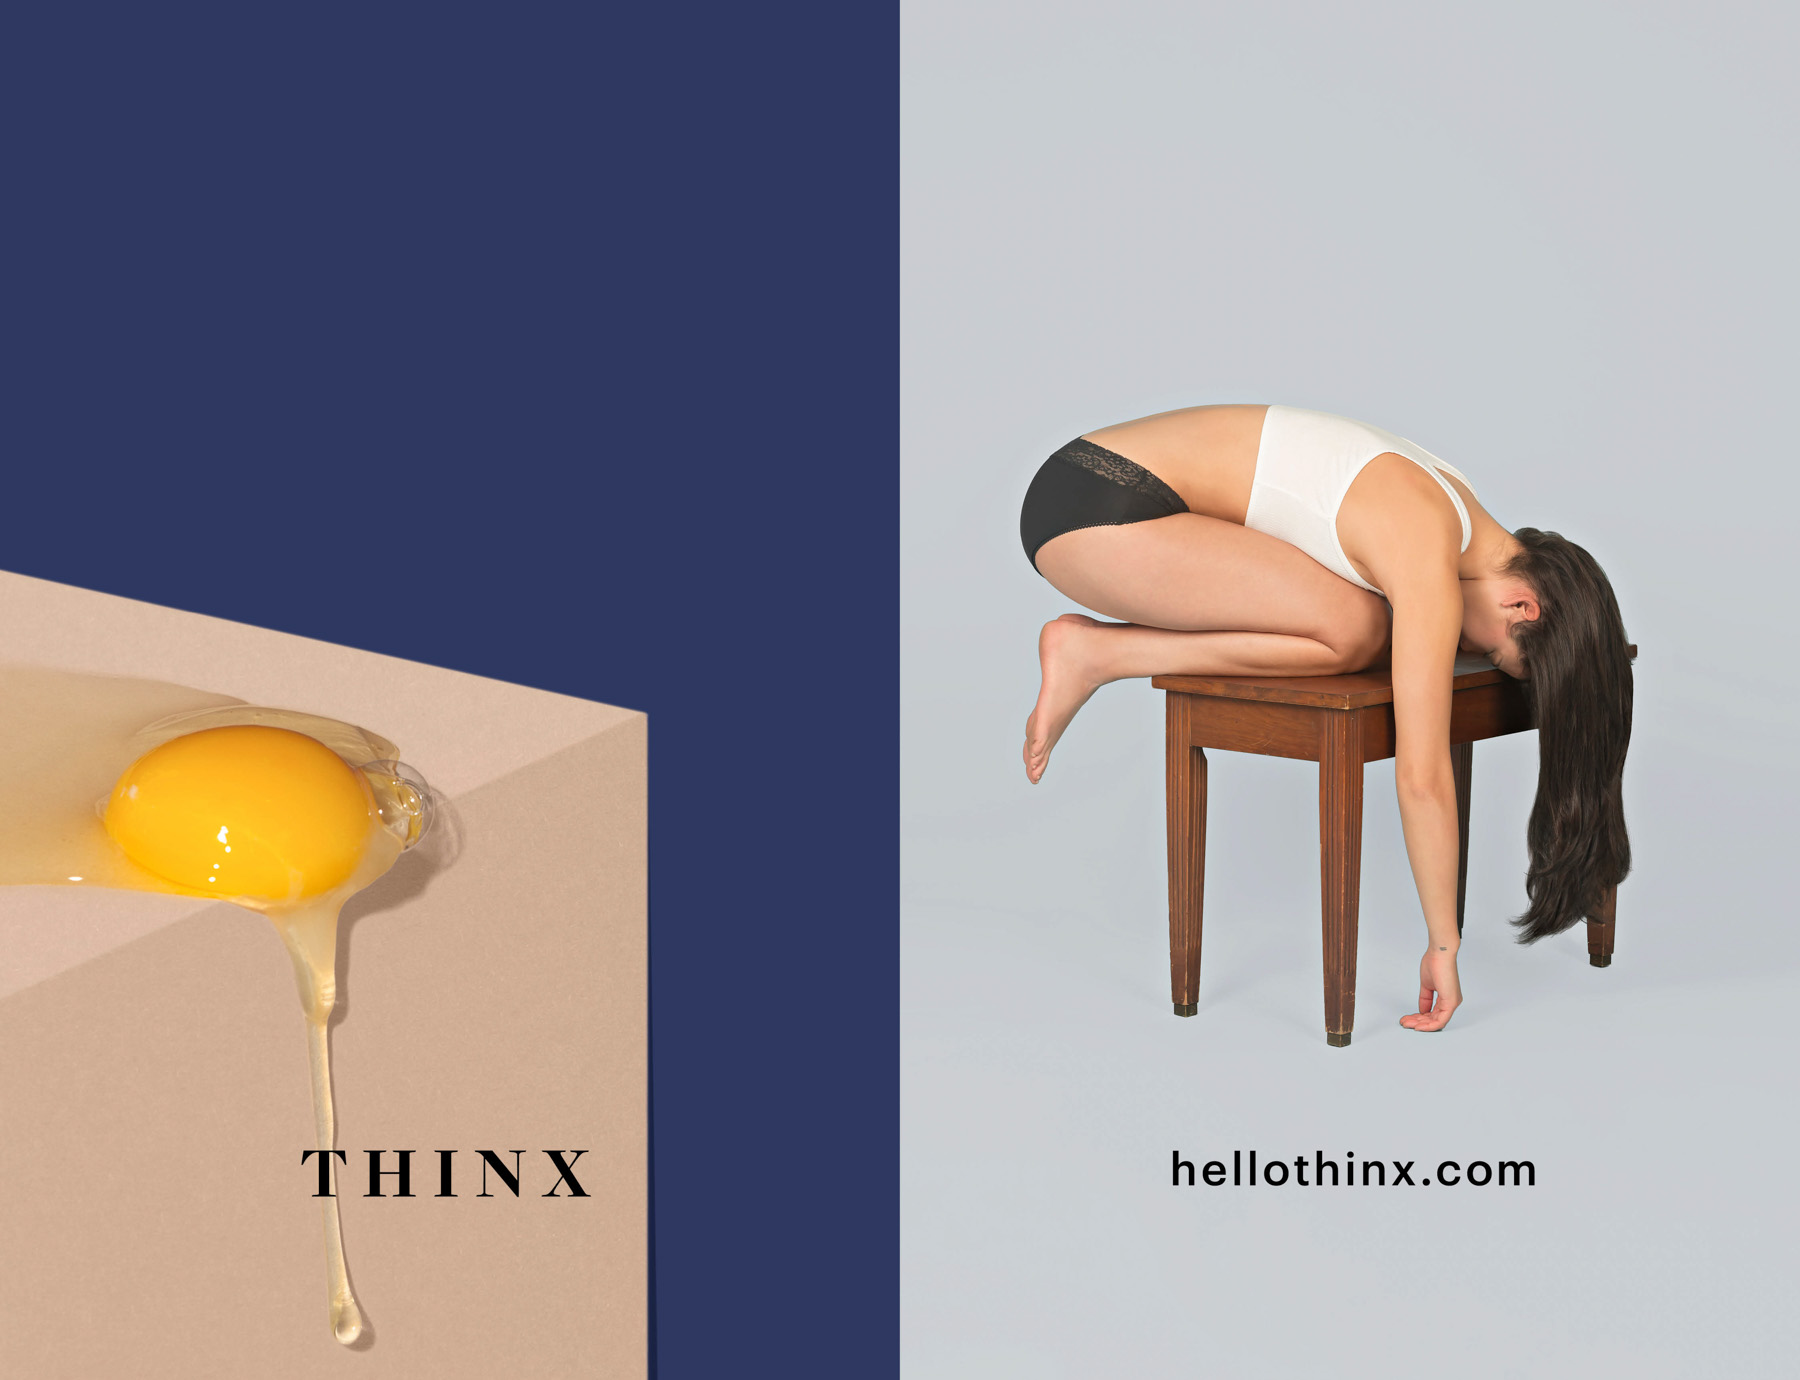 Talking taboo with Thinx co-founder Miki Agrawal — The Challenger Project